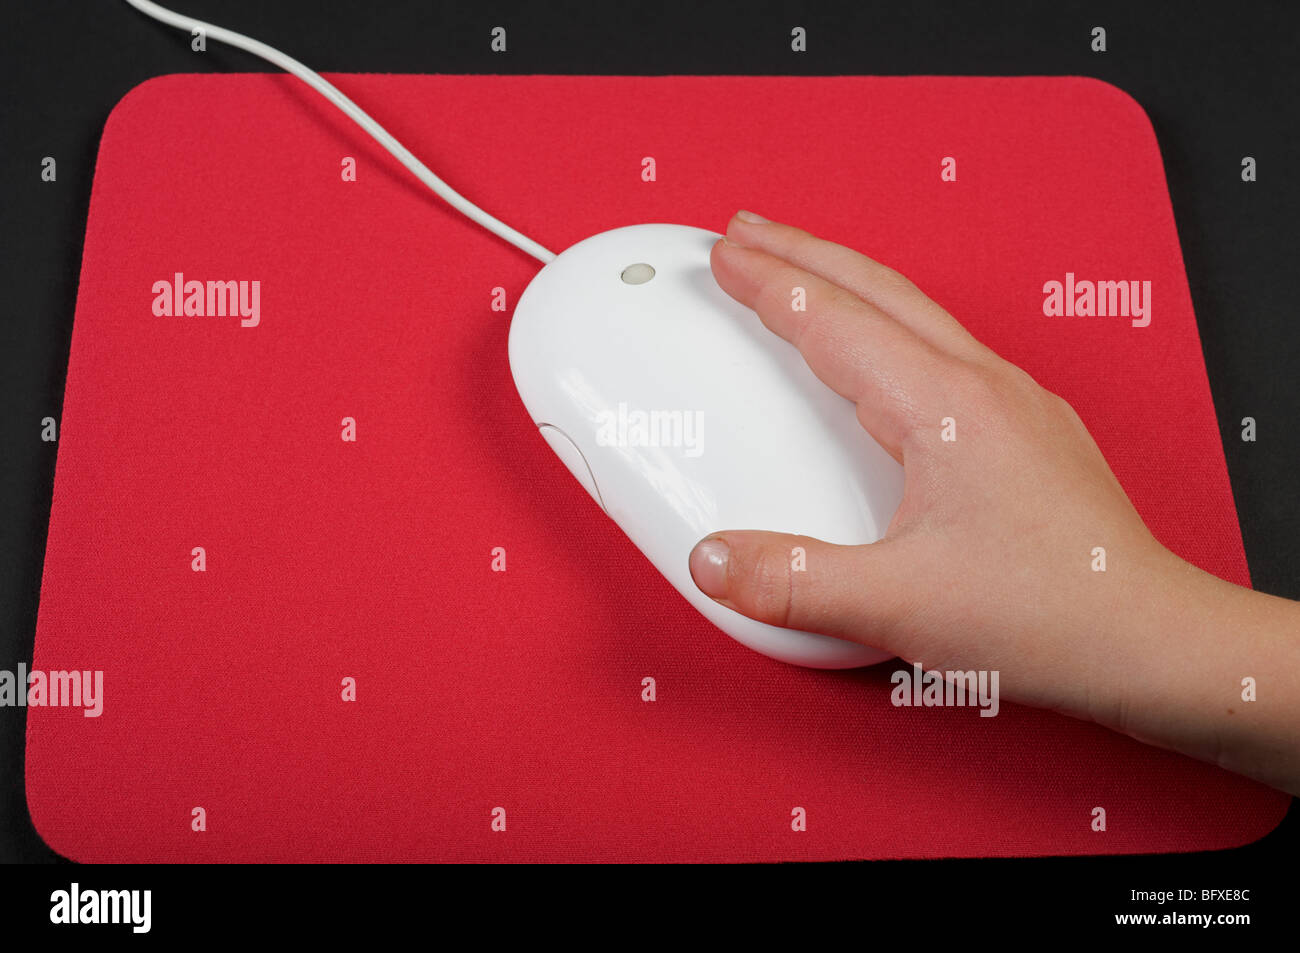 Child's hand controlling a computer's mouse Stock Photo